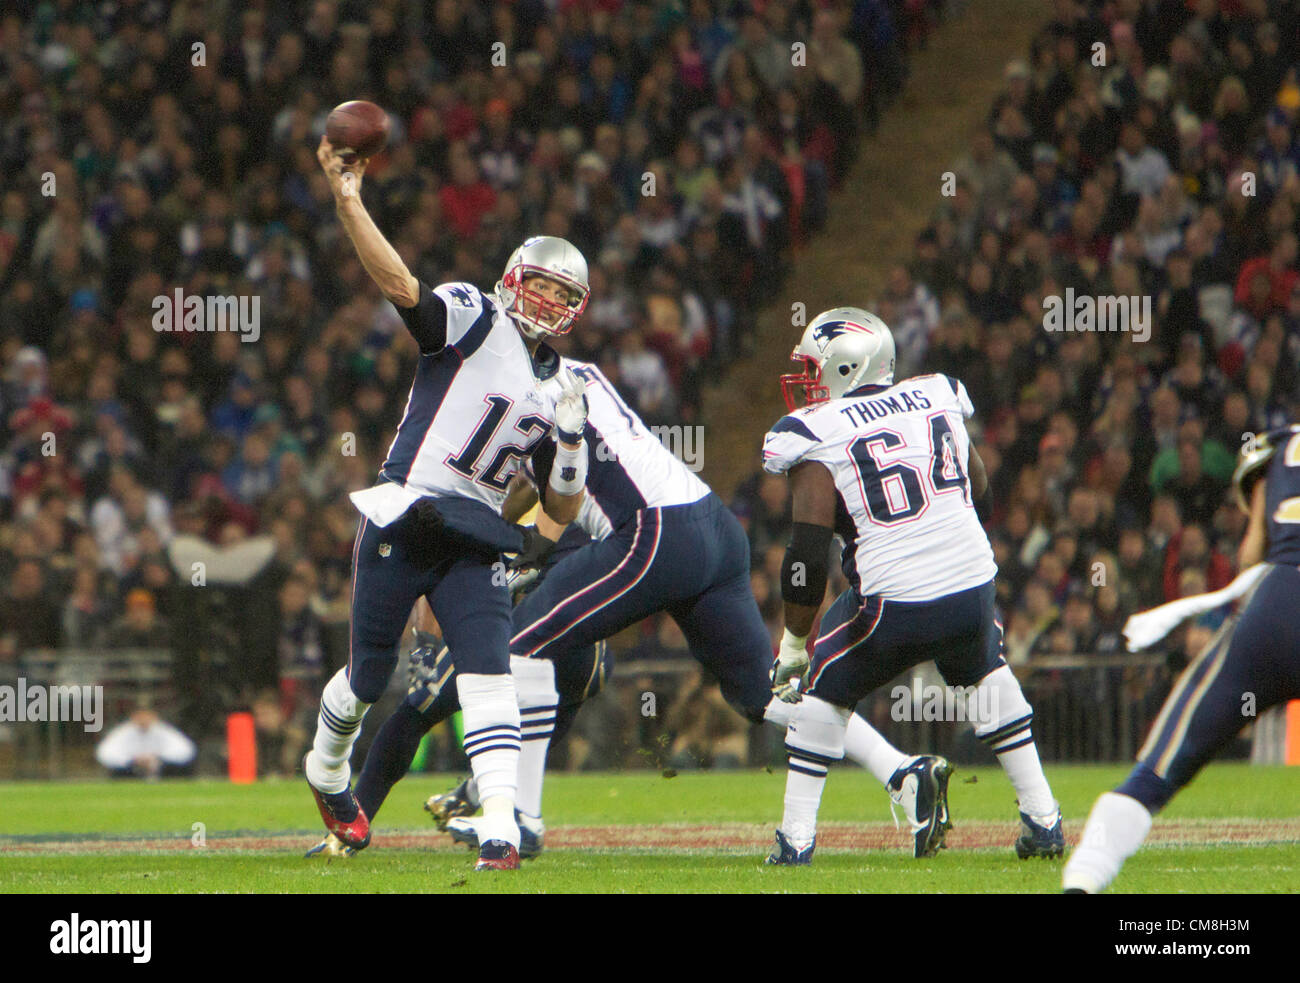 28.10.2012 London, England.  NE Patriots QB Tom Brady throws a TD pass during the NFL International Series 2012 game between The Bill Belichick and Tom Brady led New England Patriots and The St Louis Rams from Wembley Stadium. Stock Photo